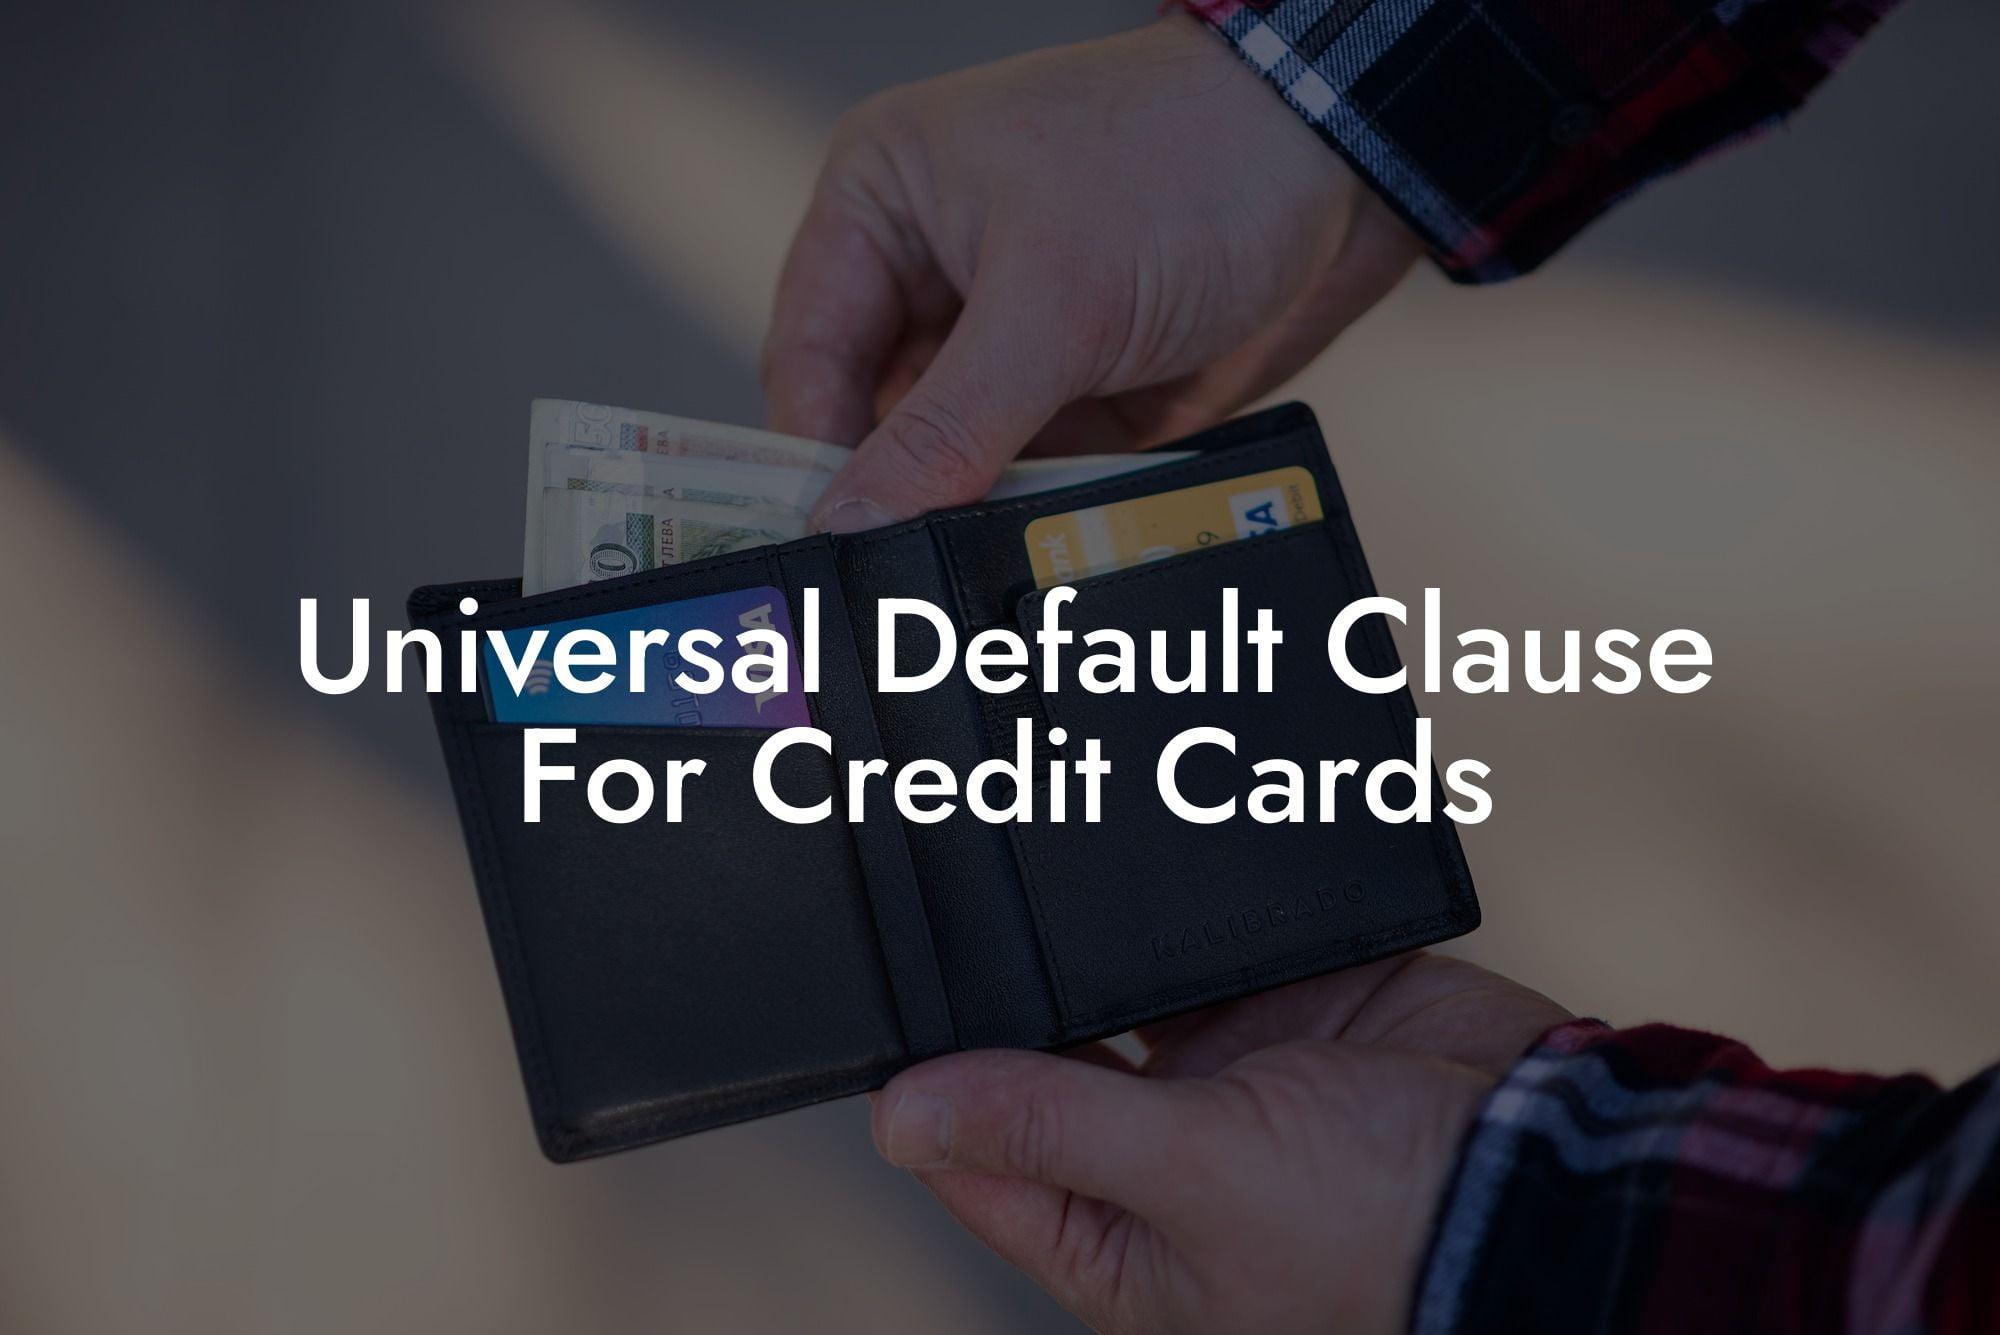 Universal Default Clause For Credit Cards